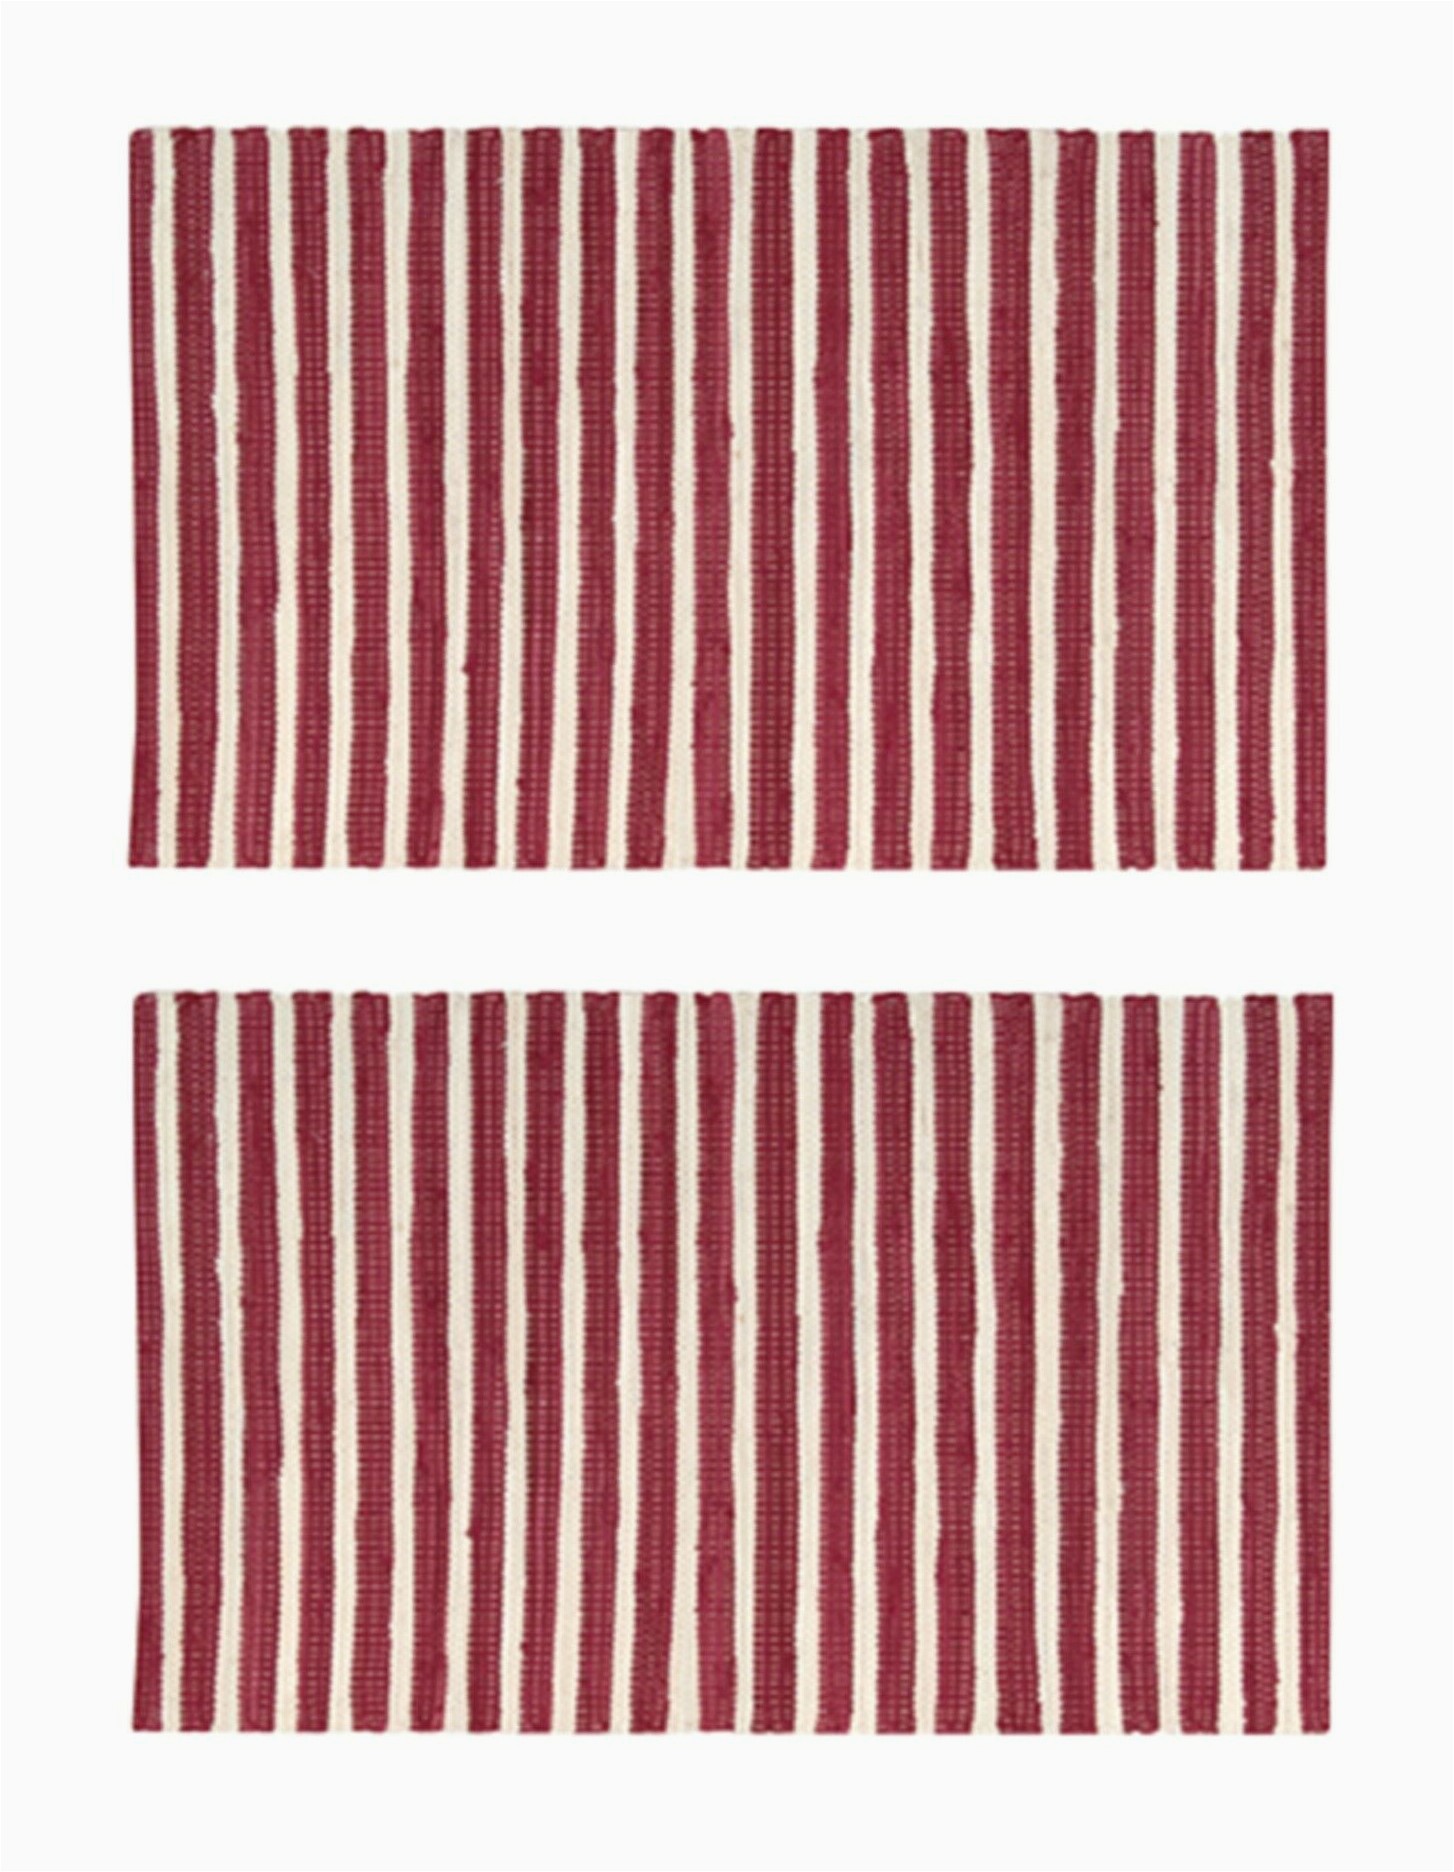 Area Rugs 30 X 48 Details About 2 Pack Nourison Brunswick Stripe Accent Floor area Rugs 24" X 36" or 30" X 48"